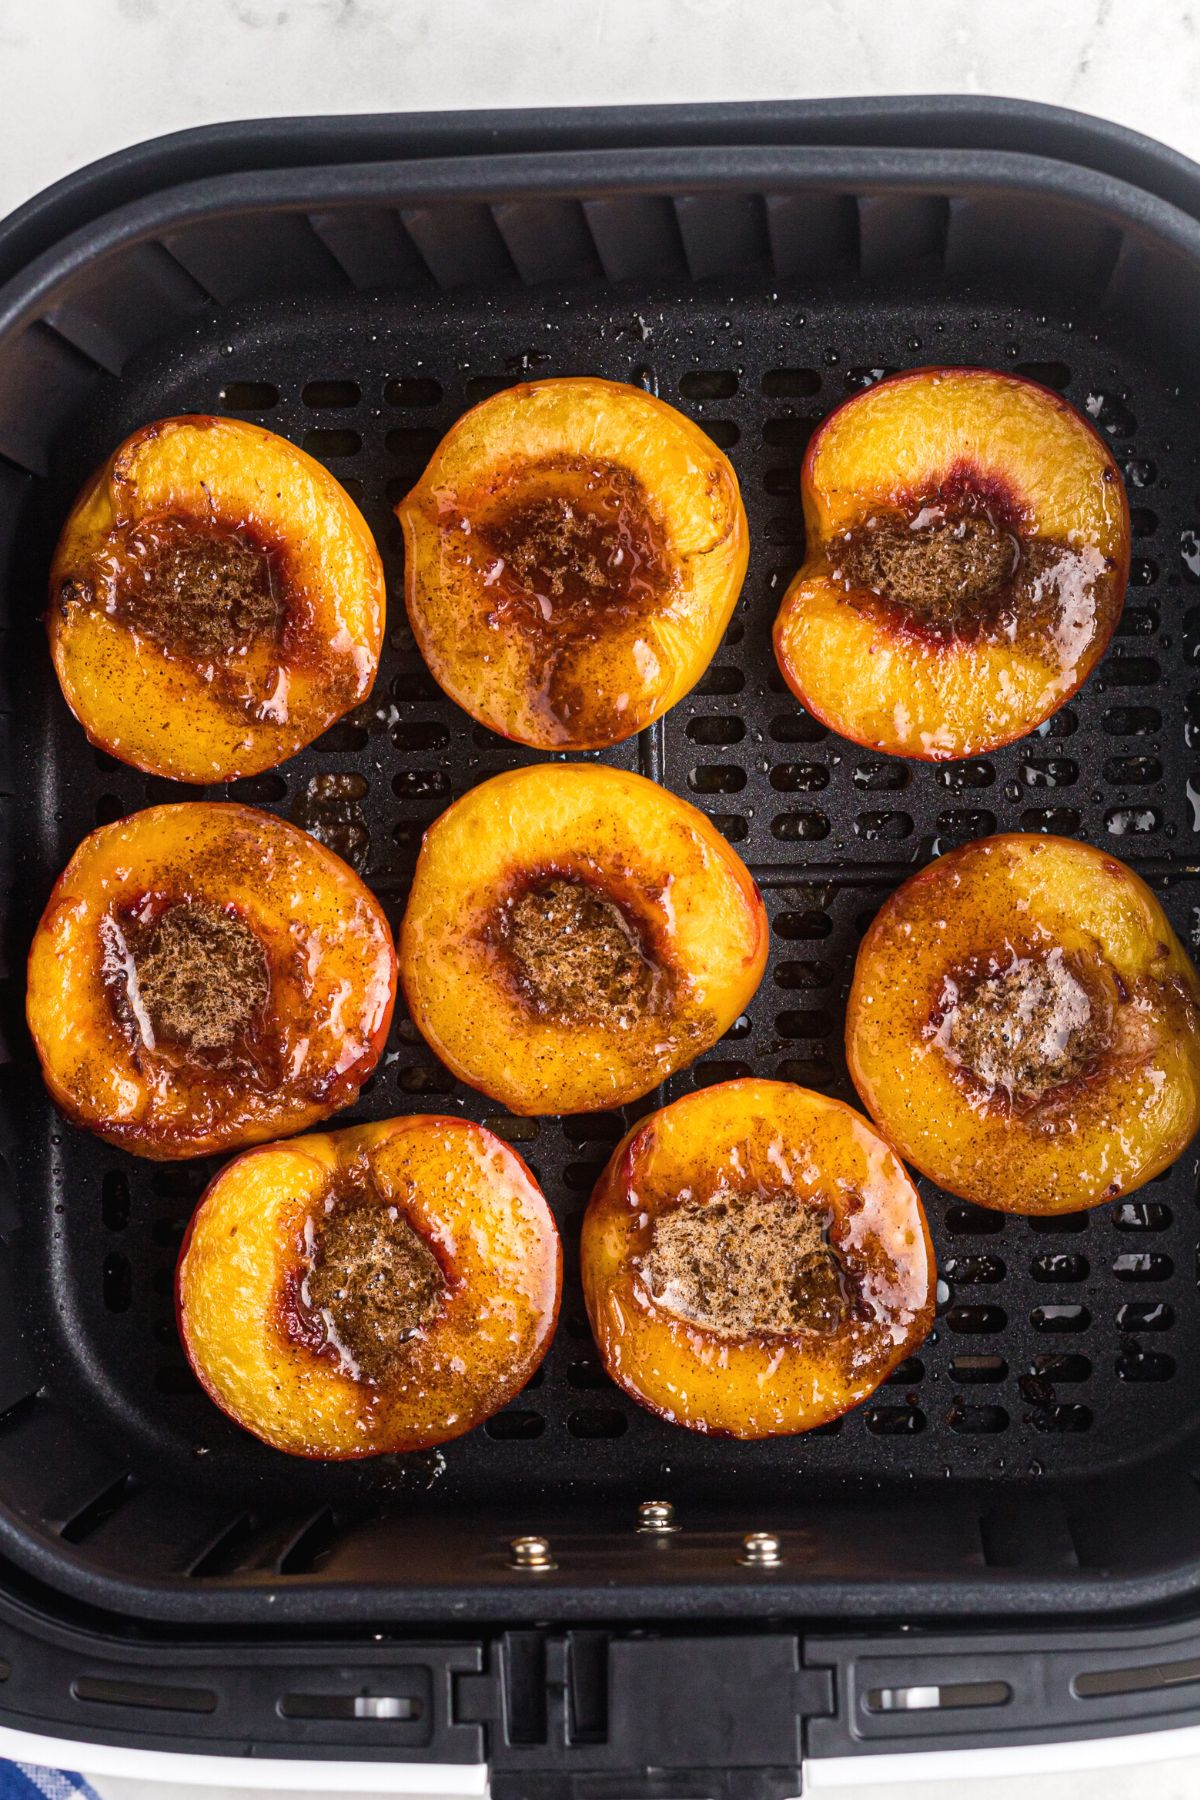 Juicy golden peaches with melted butter and sugar on top after being cooked in the air fryer basket